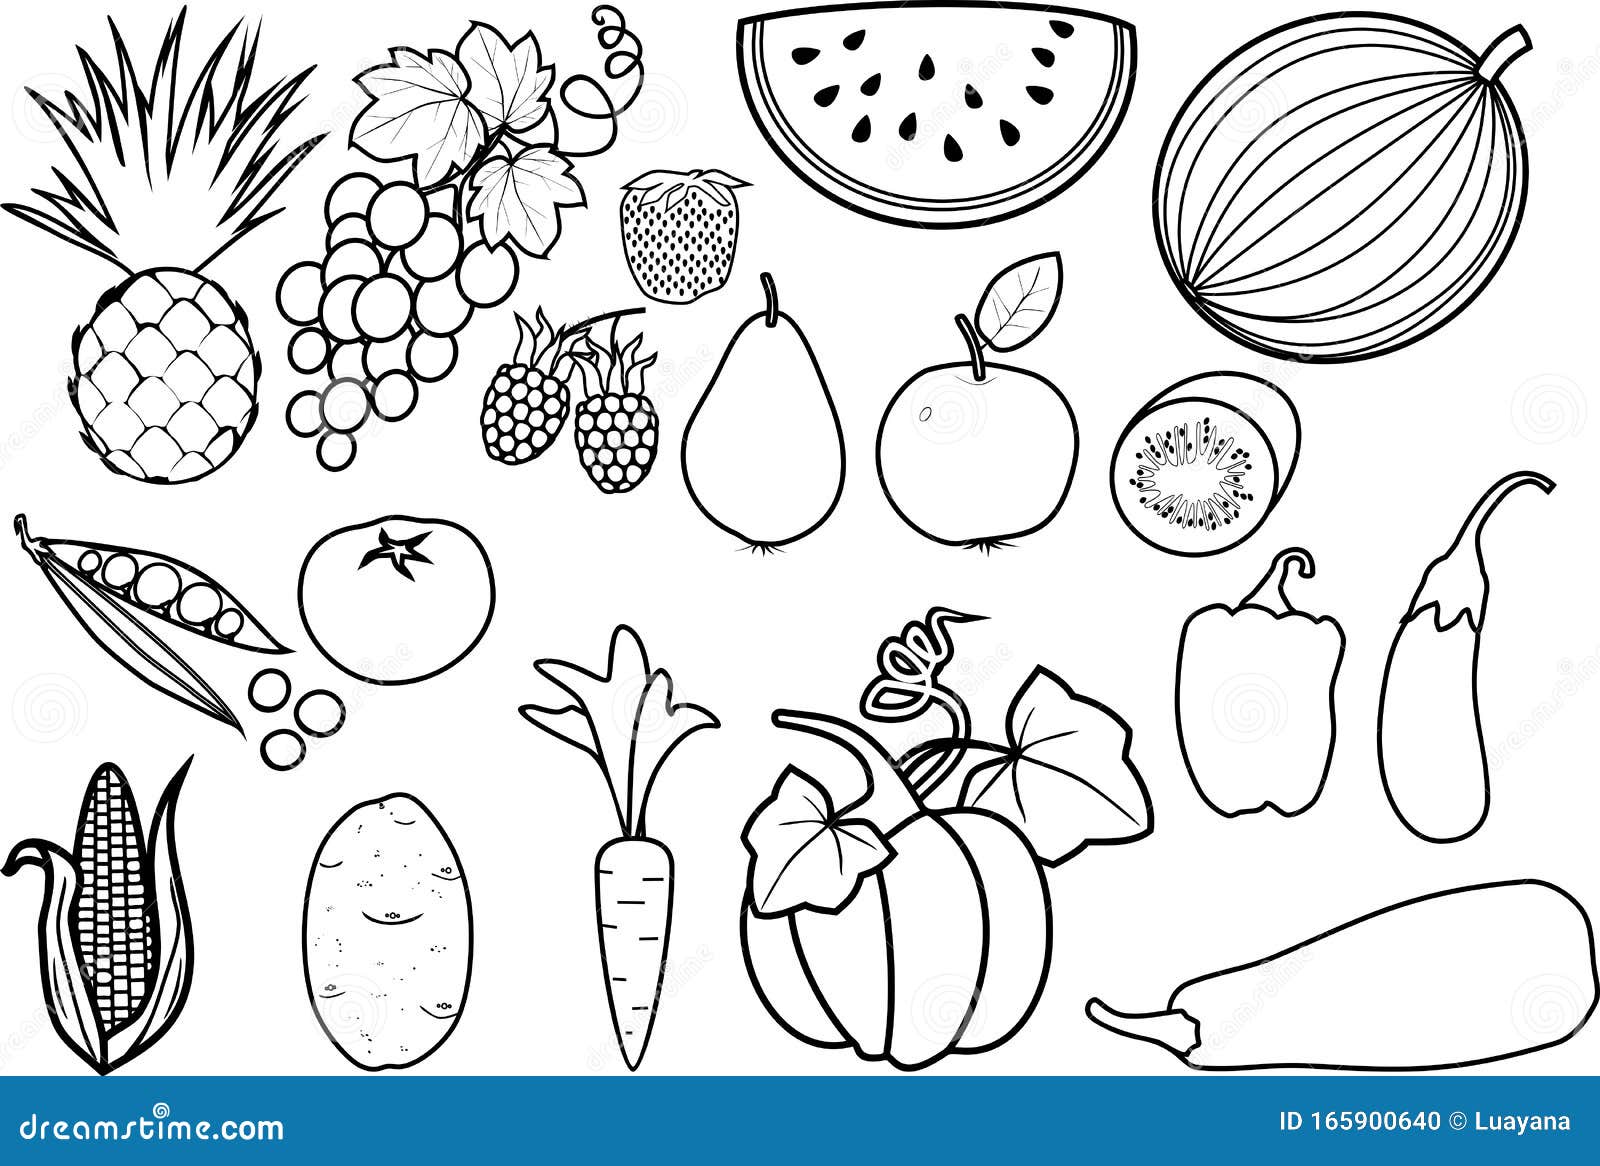 Coloring page set of different fruits and vegetables stock vector